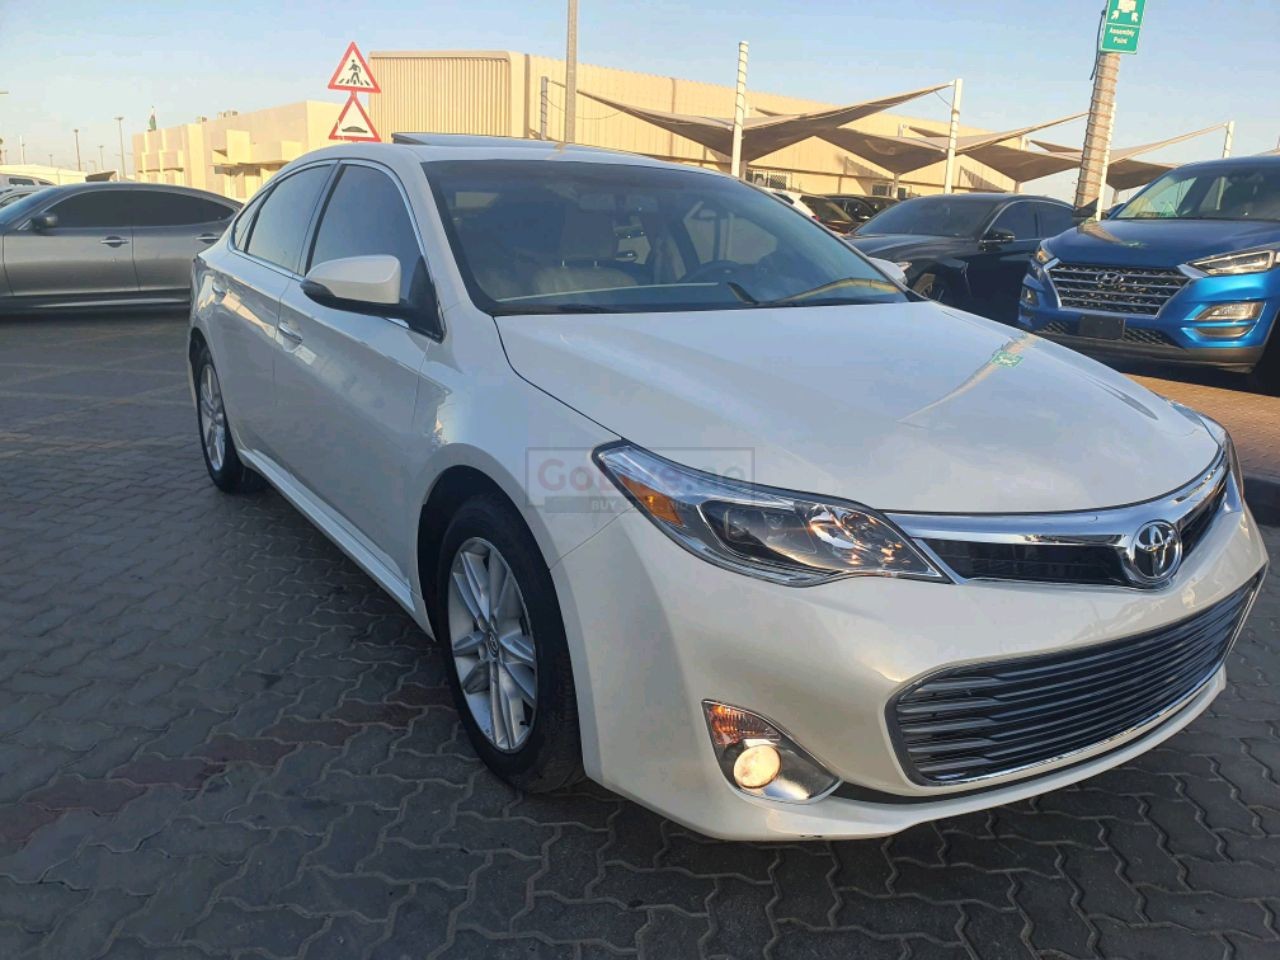 Toyota Avalon 2013 FOR SALE Good condition